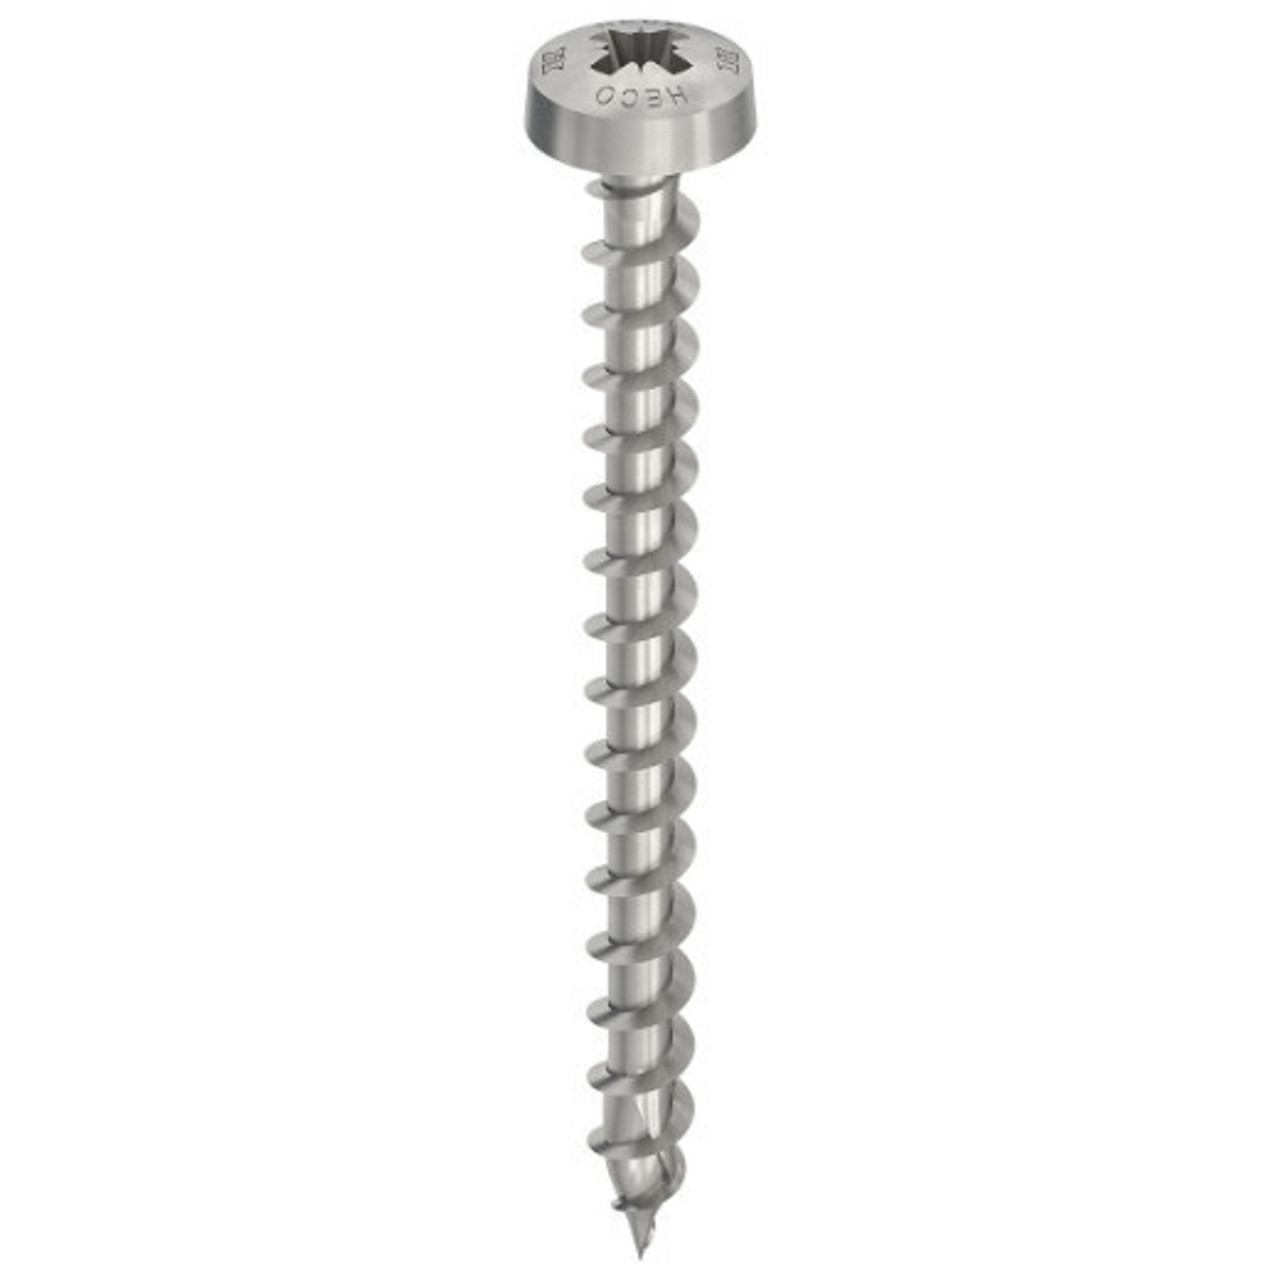 HECO Pan Head Screws | 5mm A2 304 Stainless Steel Full Thread with PZ Drive for Timber to Steel Connection, Outdoor Screws in Newcastle, Sydney and Online.